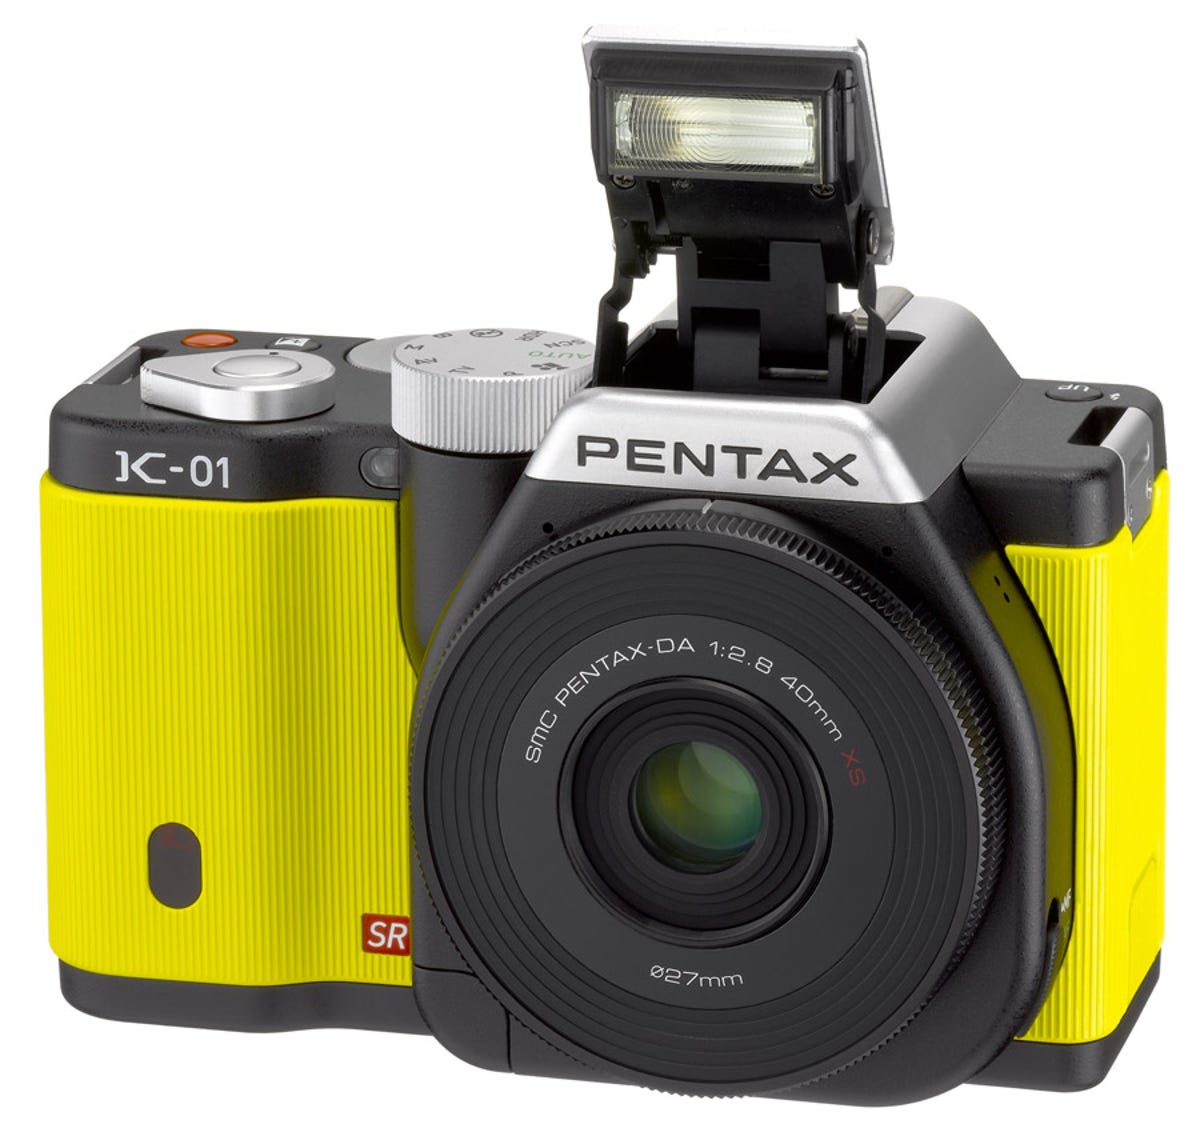 Pentax K-01 with the new 40mm pancake lens